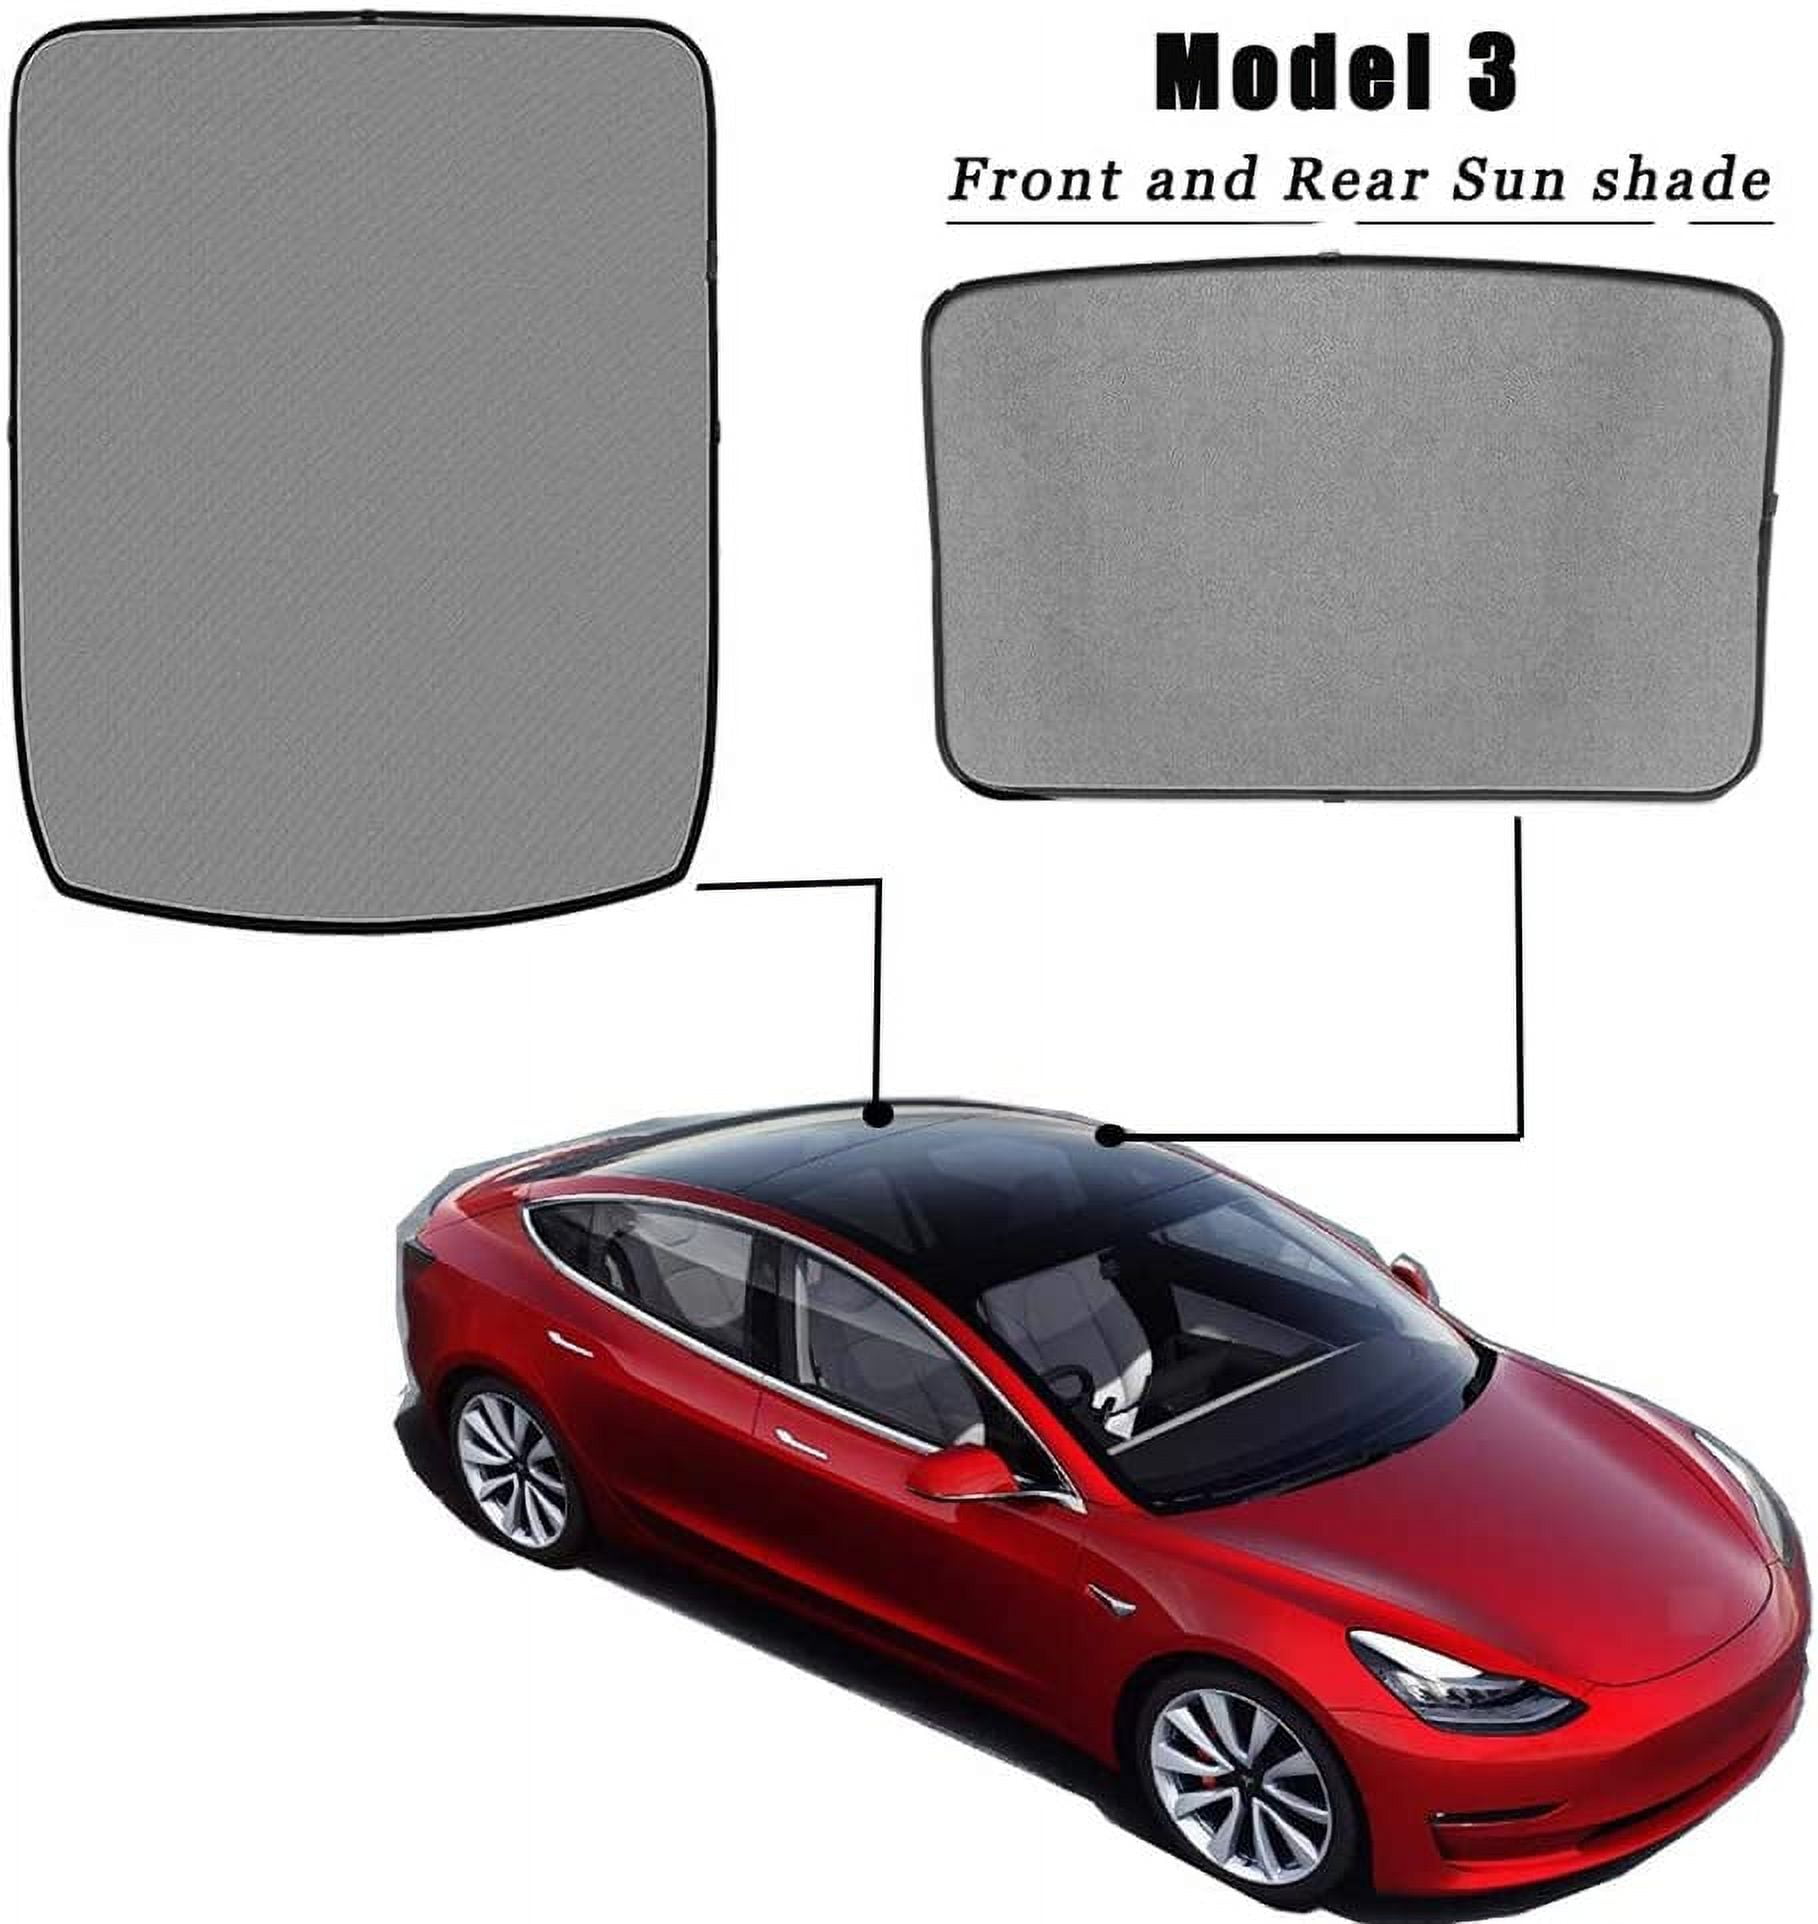 Mode 3 Glass Roof Sunshade Sunroof Rear Window Sunshade Compatible for  Tesla Mode 3 (2 set) ( Top Roof +Rear)